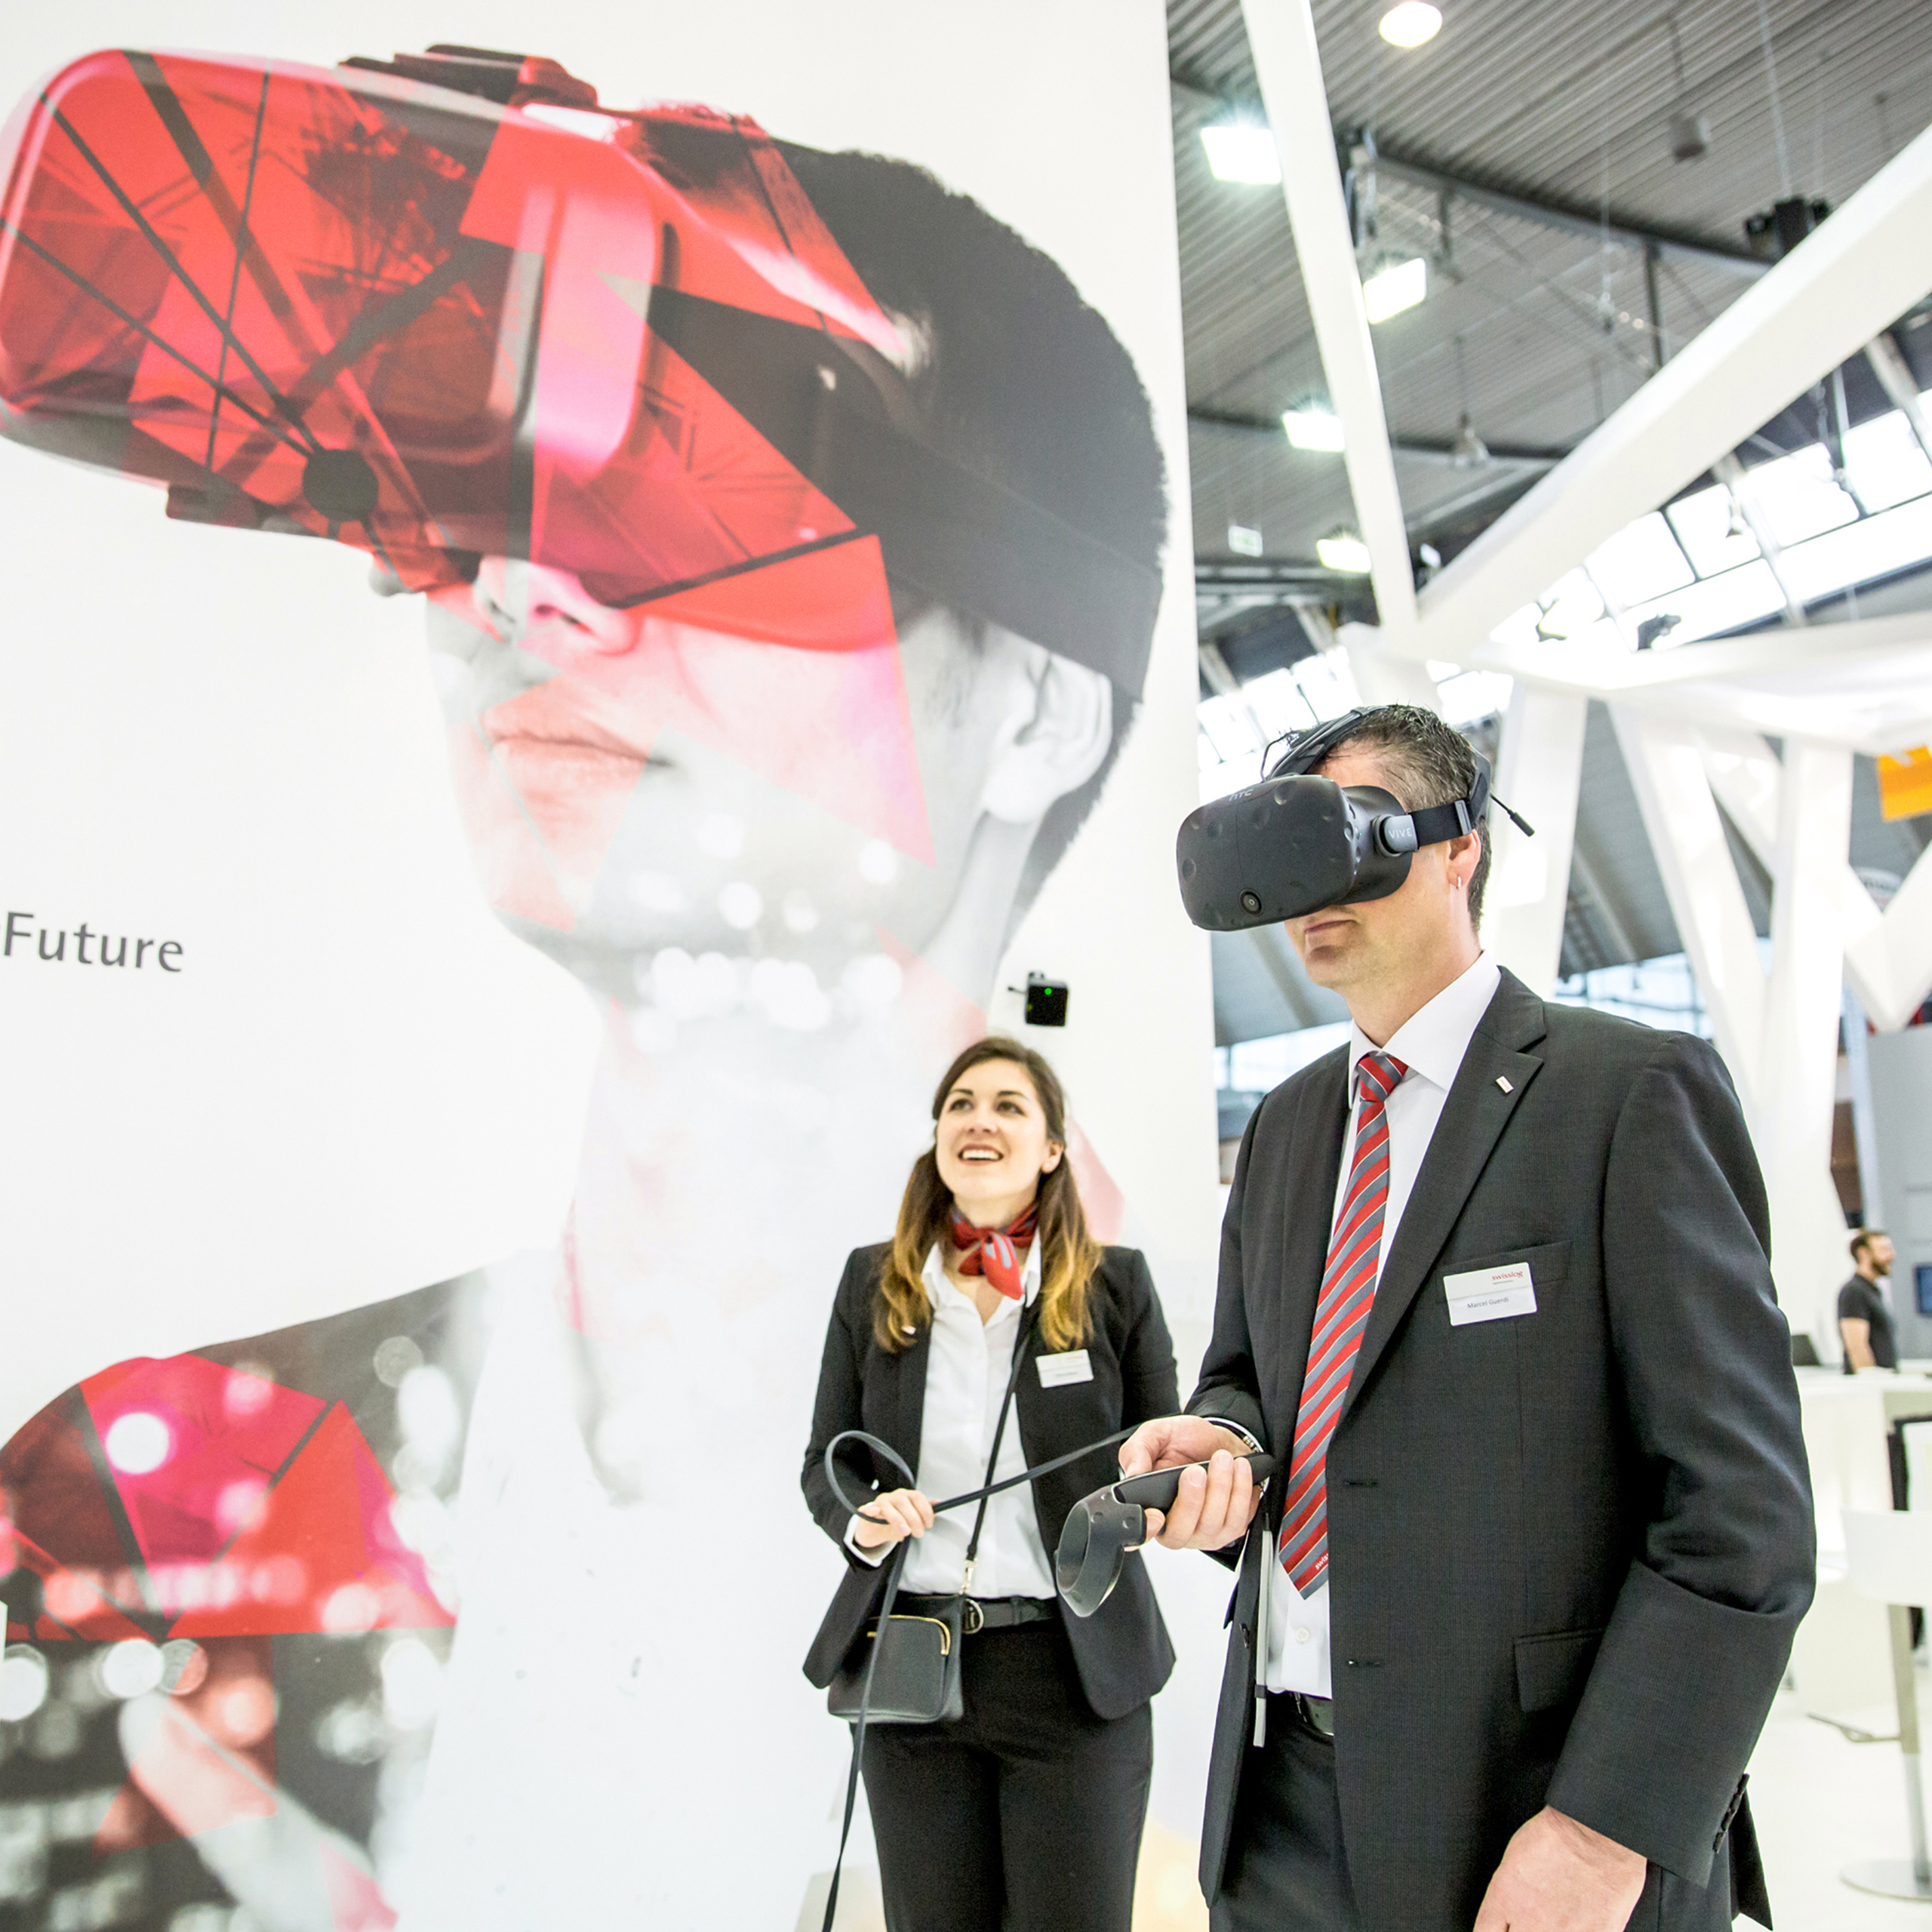 Materials Handling Middle East - Materials handling suppliers turn to virtual reality 3D animation as educational tool for latest warehouse technologies